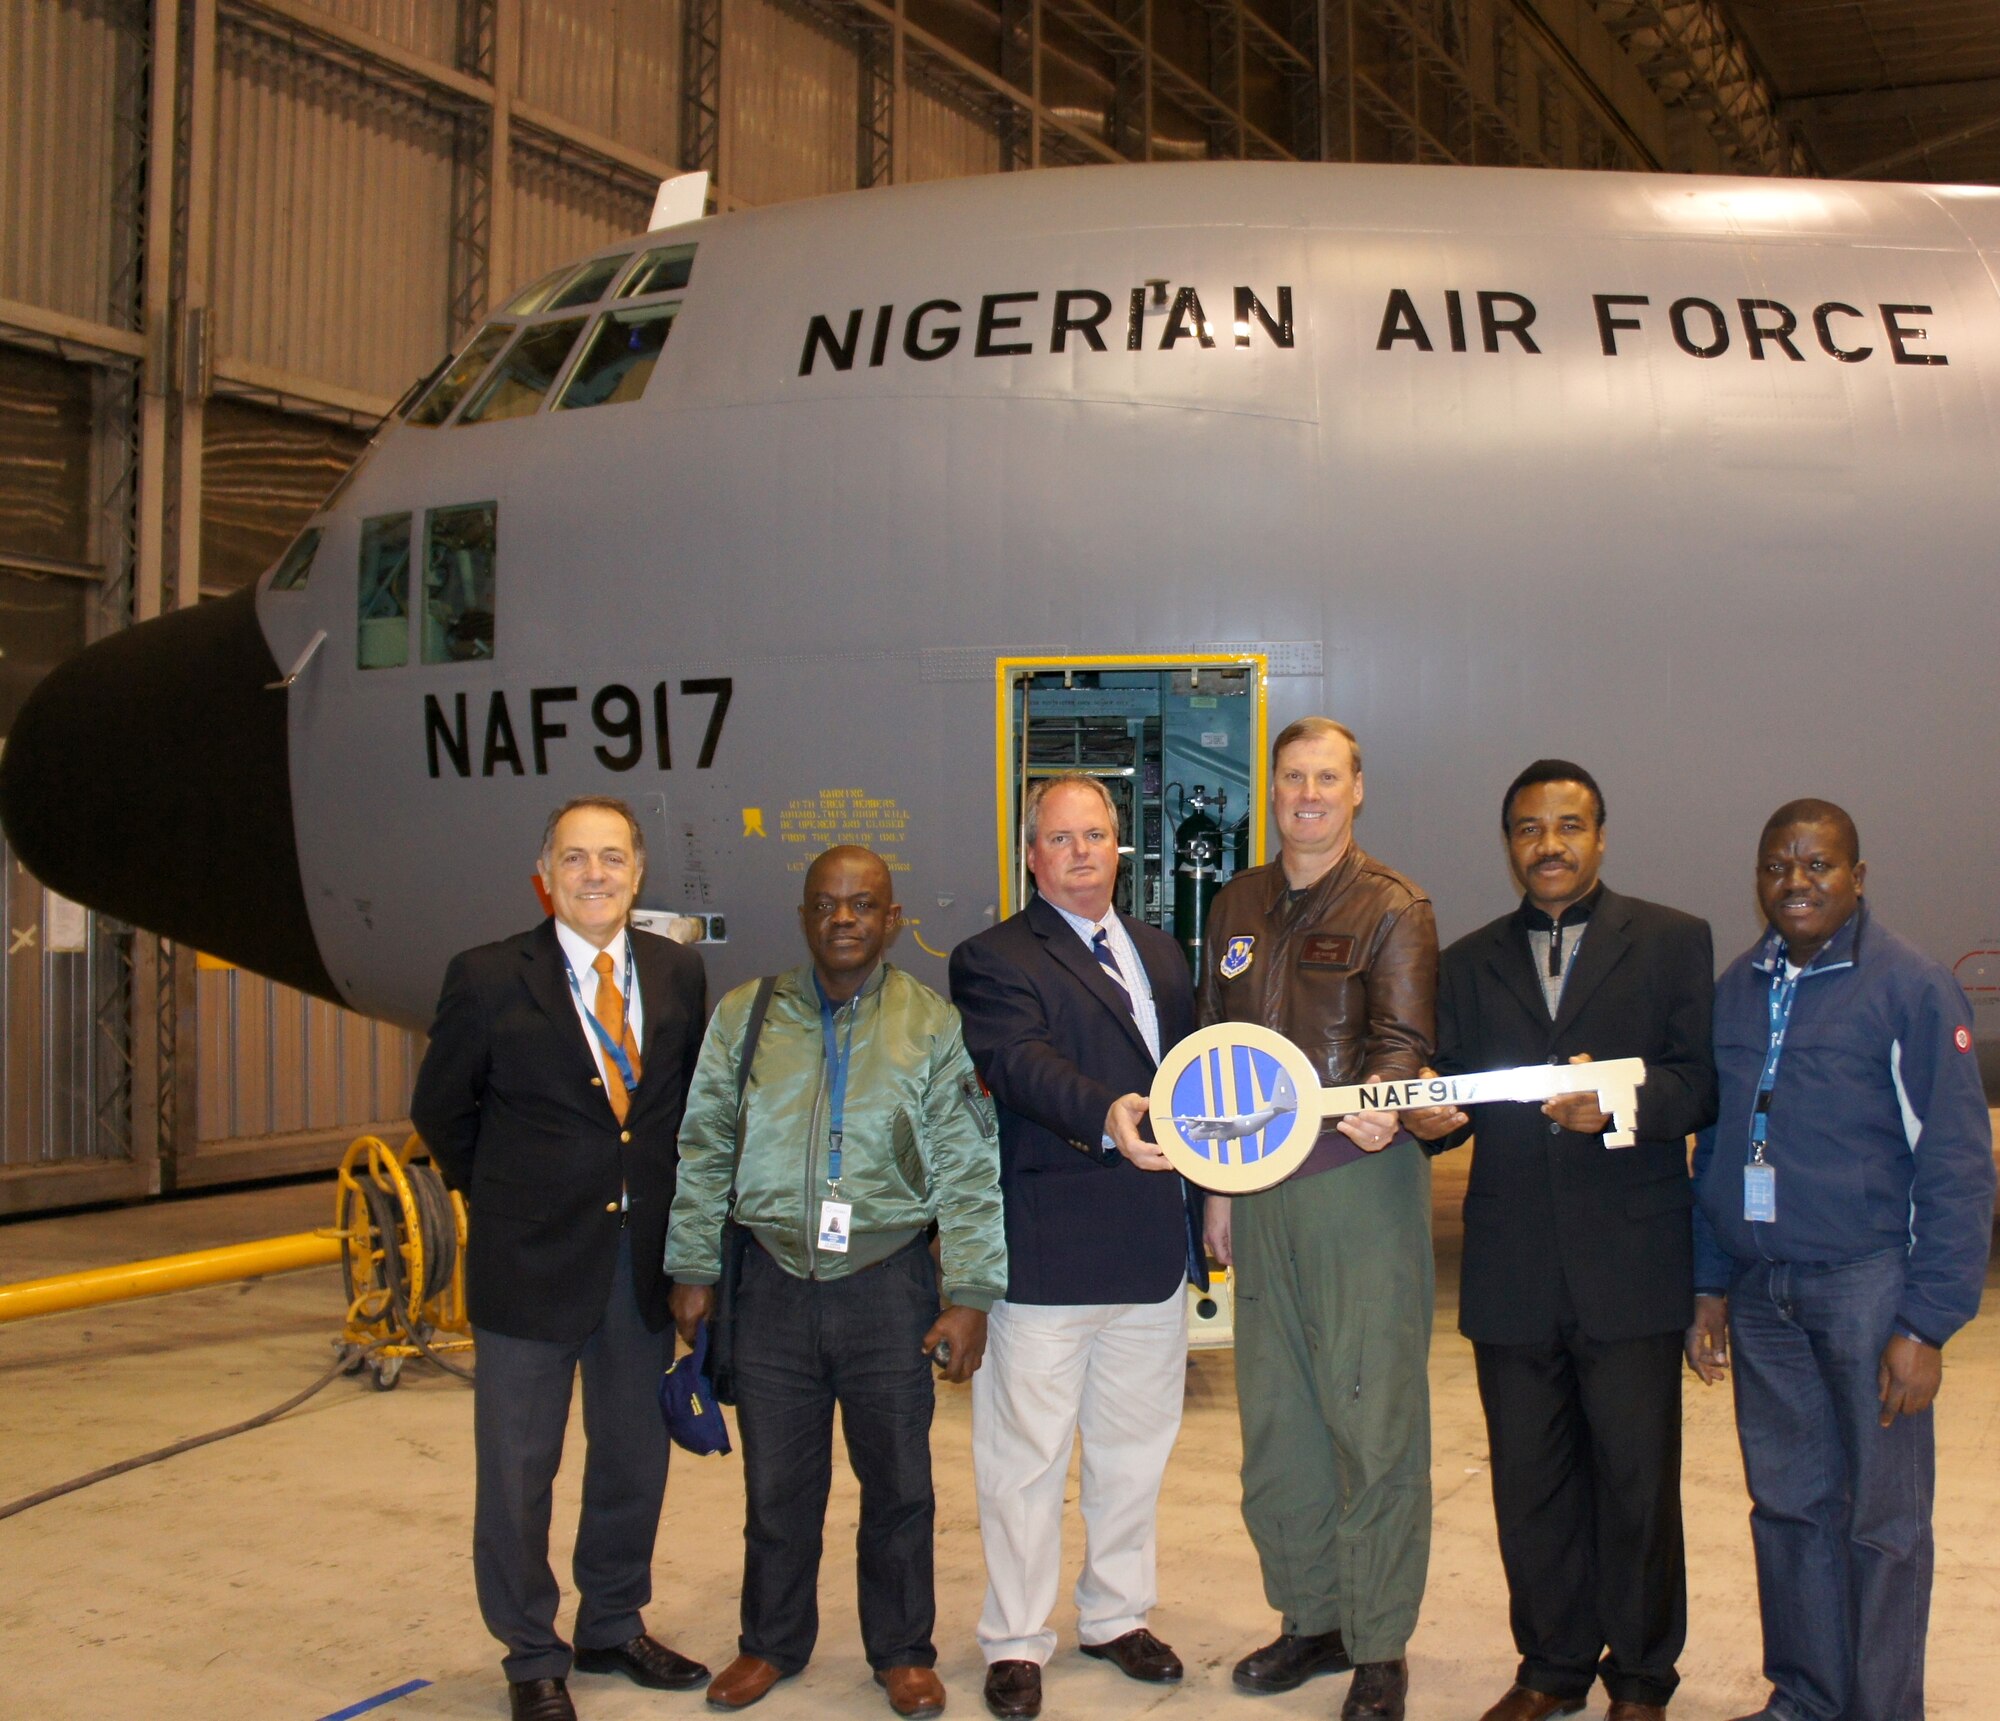 LISBON, Portugal - The ceremonial key to the first of five refurbished
C-130H aircraft is being handed back to the Nigerian Air Force Jan. 26 after
more than a year in depot maintenance. Seventeenth Air Force (Air Forces
Africa) is orchestrating the capacity-building activity with its partner
nation, which includes an extensive maintenance process to upgrade their
fleet. (Courtesy photo)
